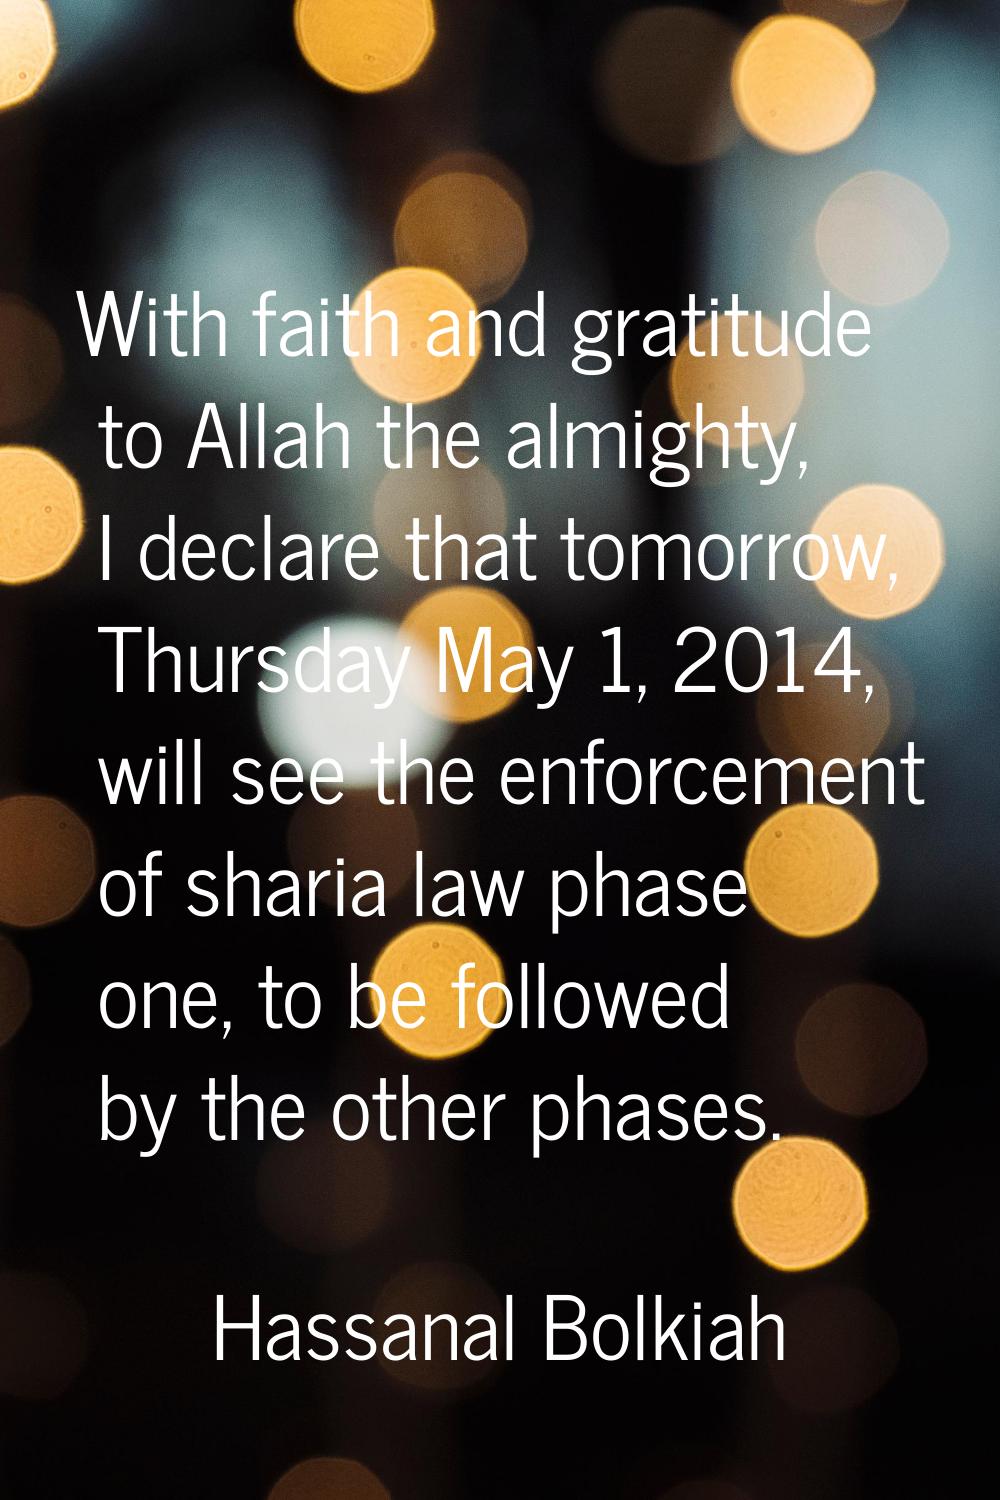 With faith and gratitude to Allah the almighty, I declare that tomorrow, Thursday May 1, 2014, will